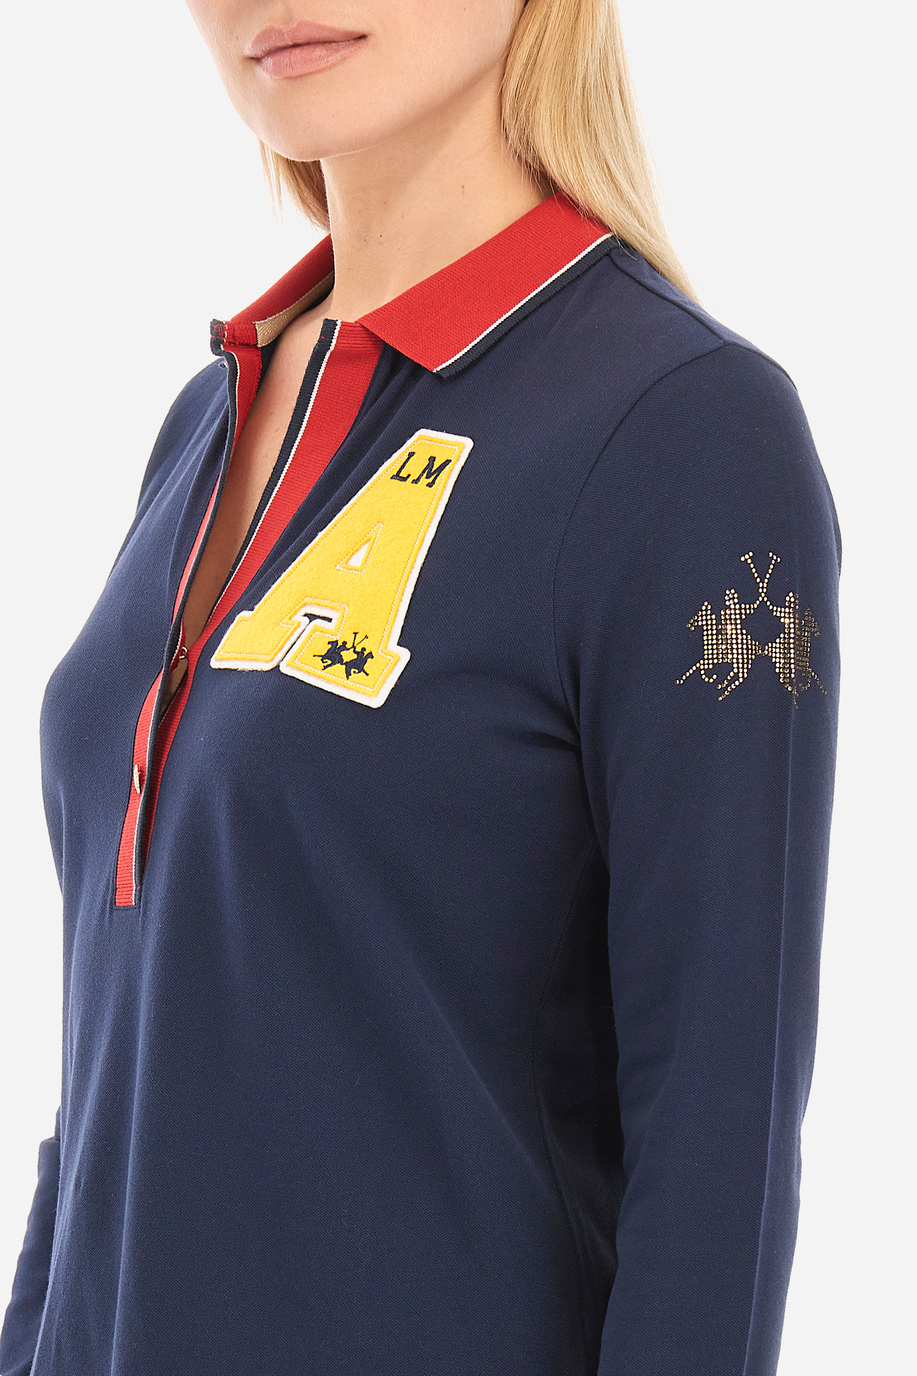 Women's polo shirt in a regular fit- Wendolyn - New Arrivals | La Martina - Official Online Shop